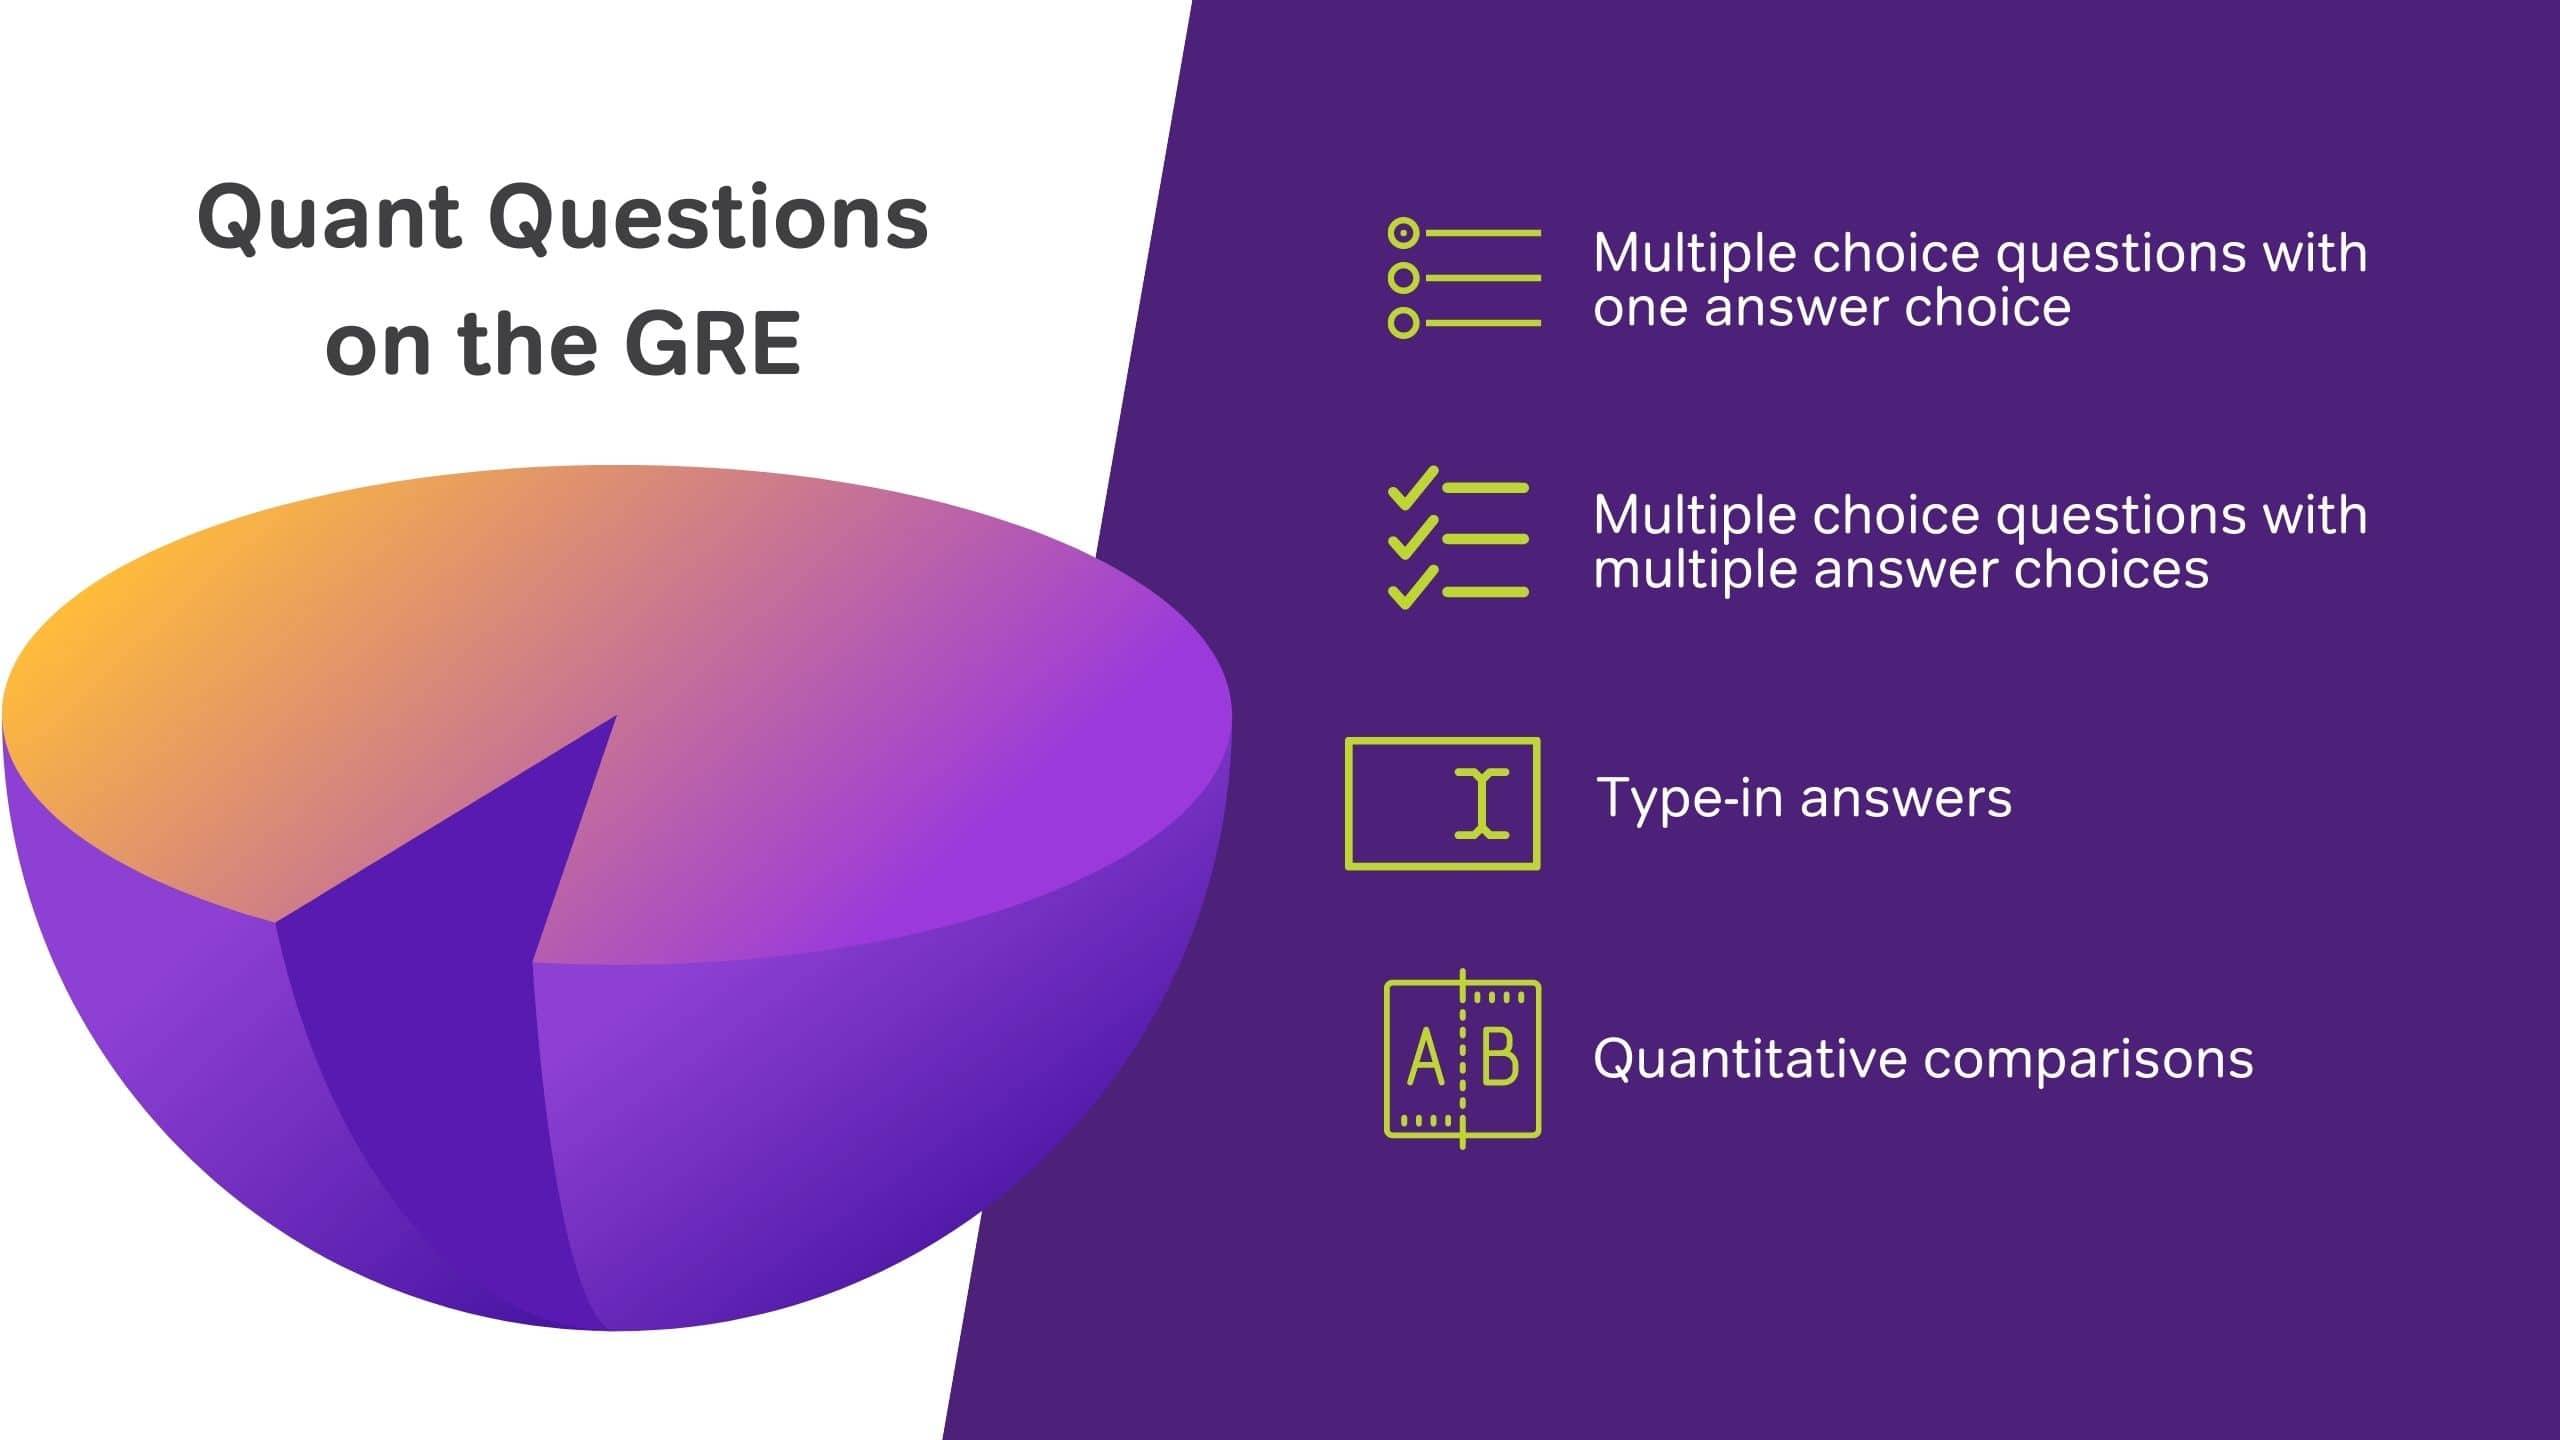 Quant questions on GRE practice test - image by Magoosh